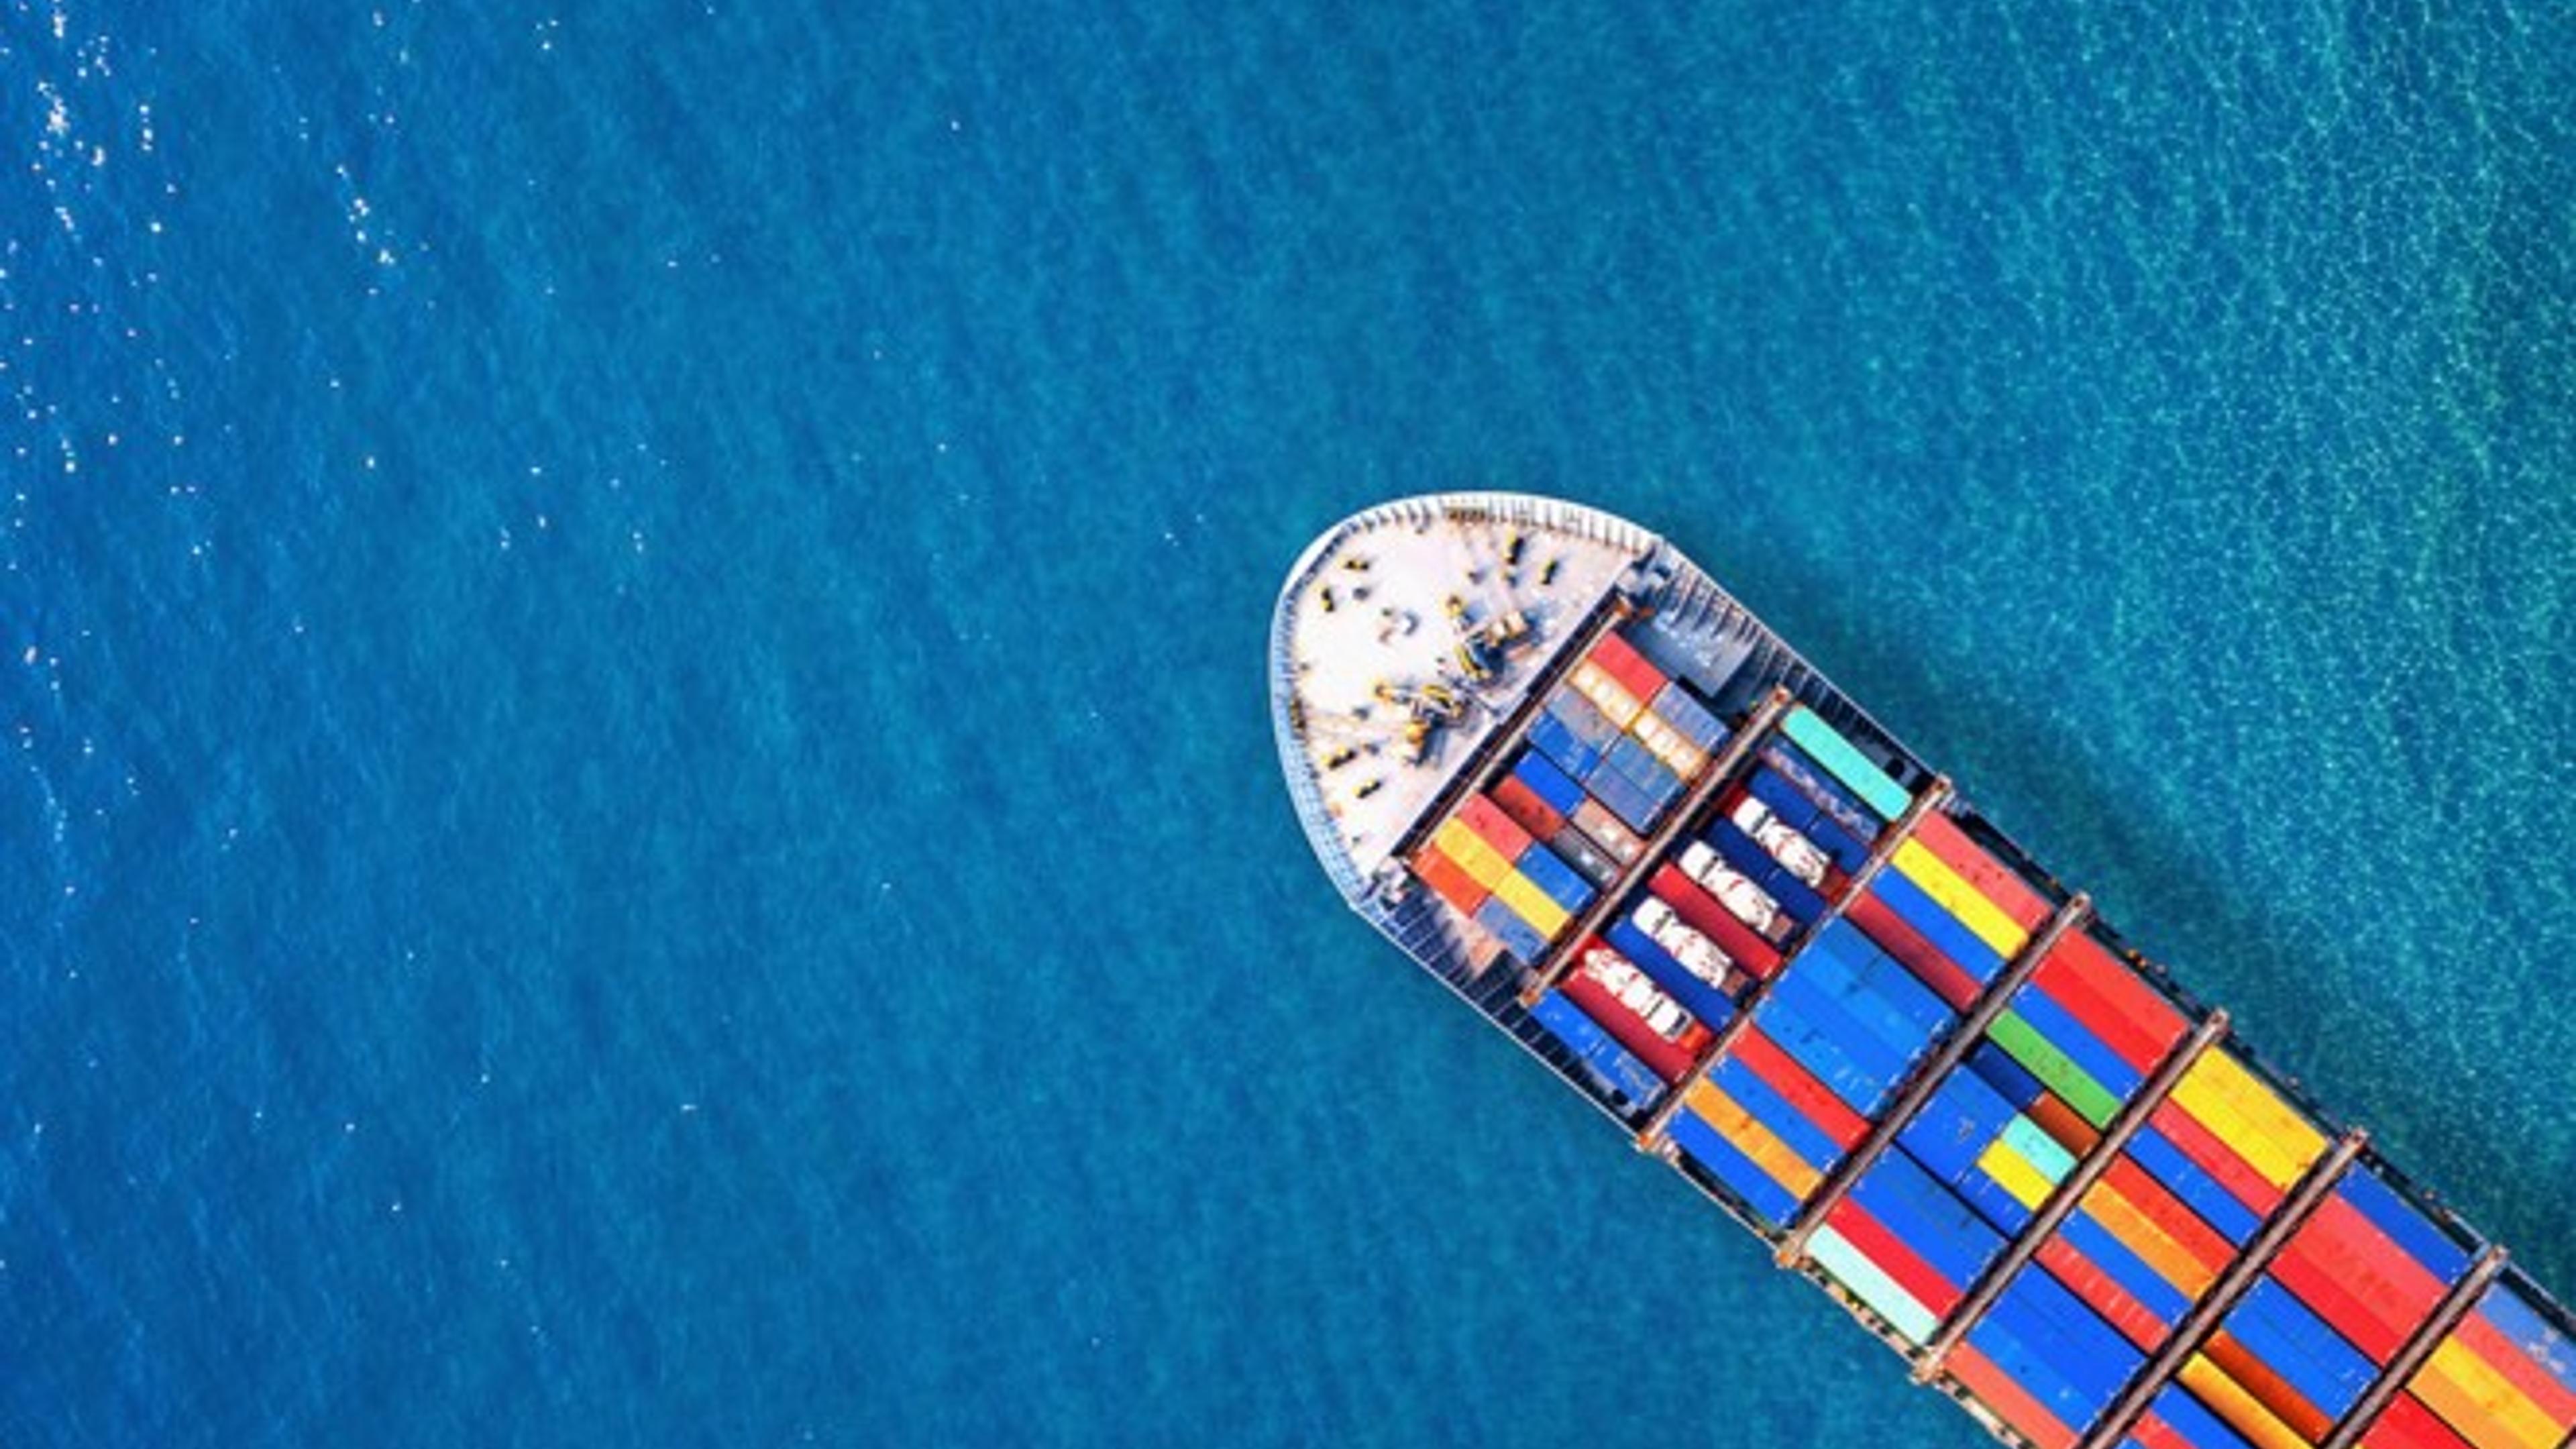 Container ship in ocean seen from above